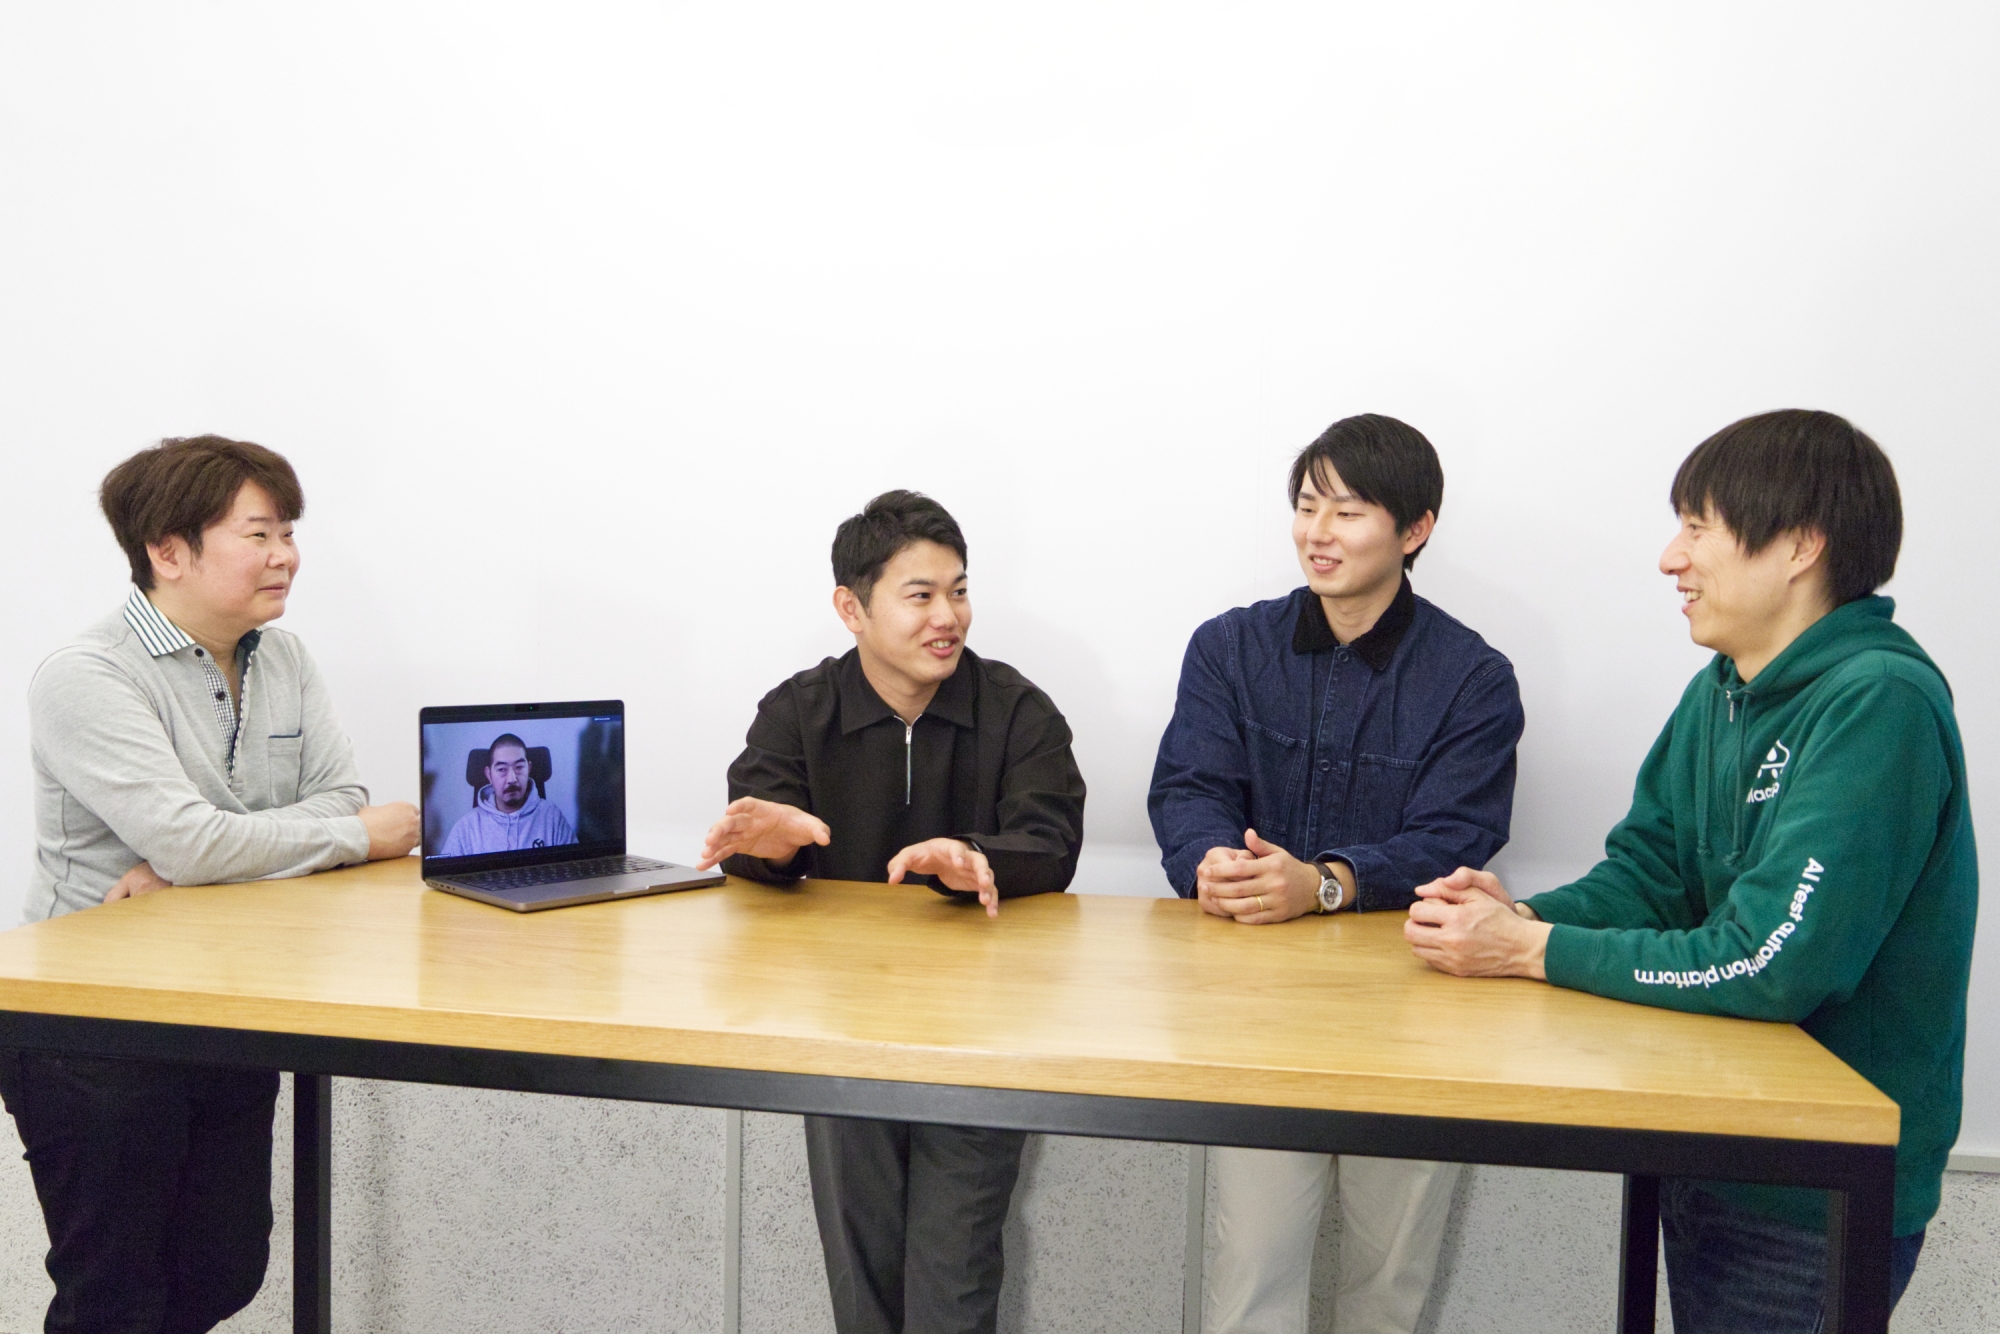 From left to right:Mr. Masato Horinouchi, Executive Officer VPoE, Head of Product Department / Mr. Hidekuni Kajita, Product Department Manager / Mr. Satoshi Azumi, Product Department, QA Engineer / Mr. Ritsuki Fujiwara, Product Department, QA Engineer